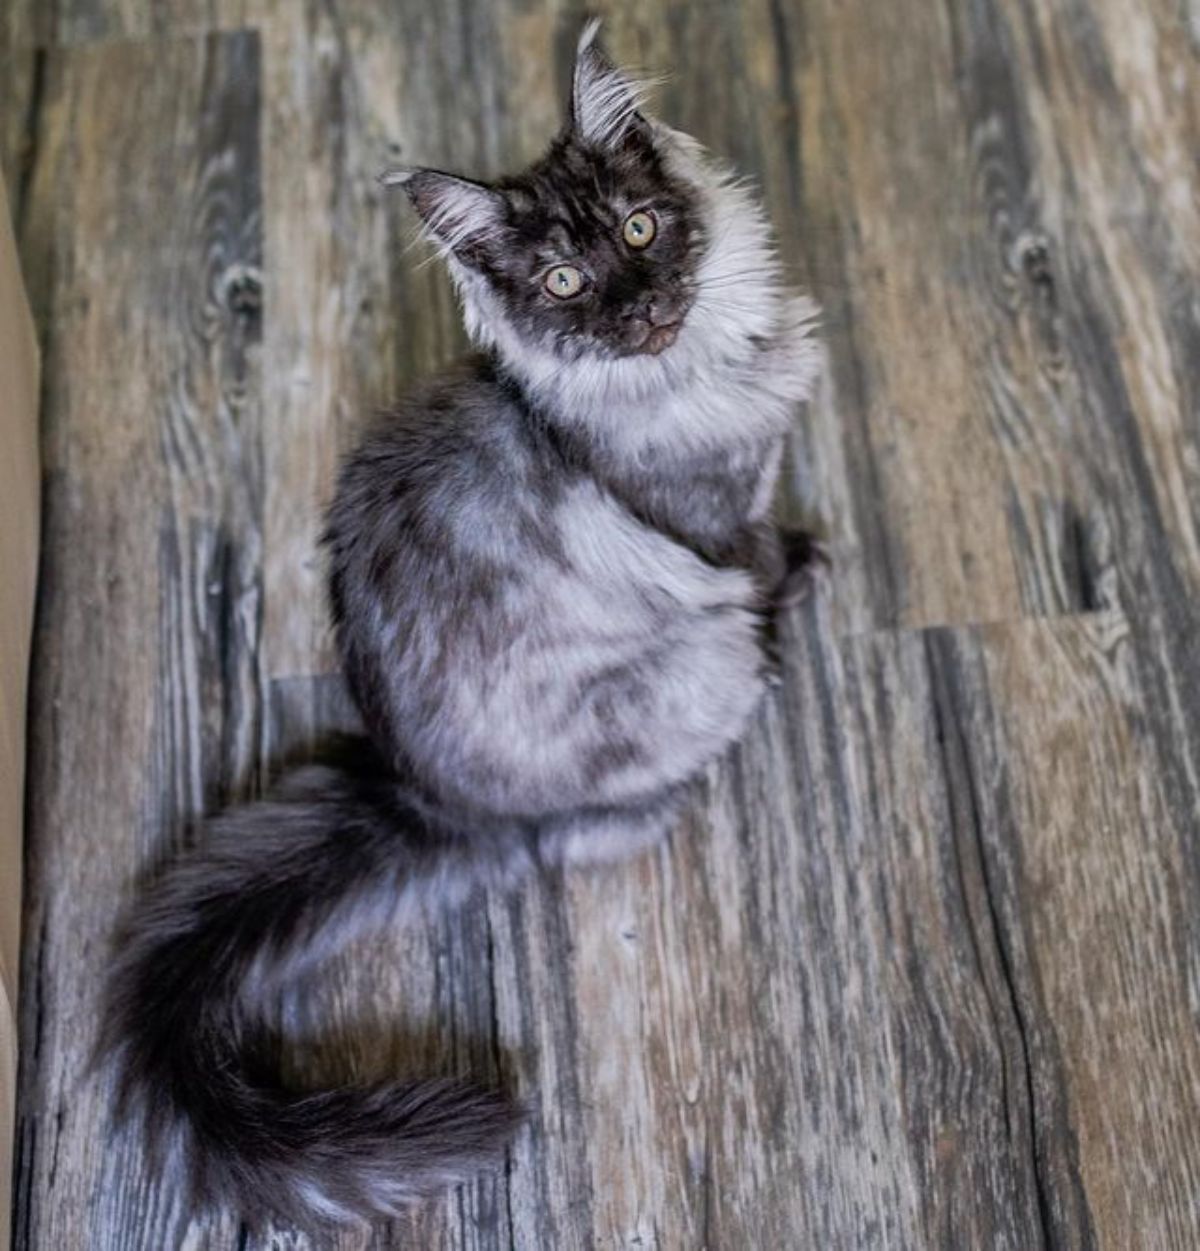 A fluffy black maine coon sitting on a floor looking upwards.